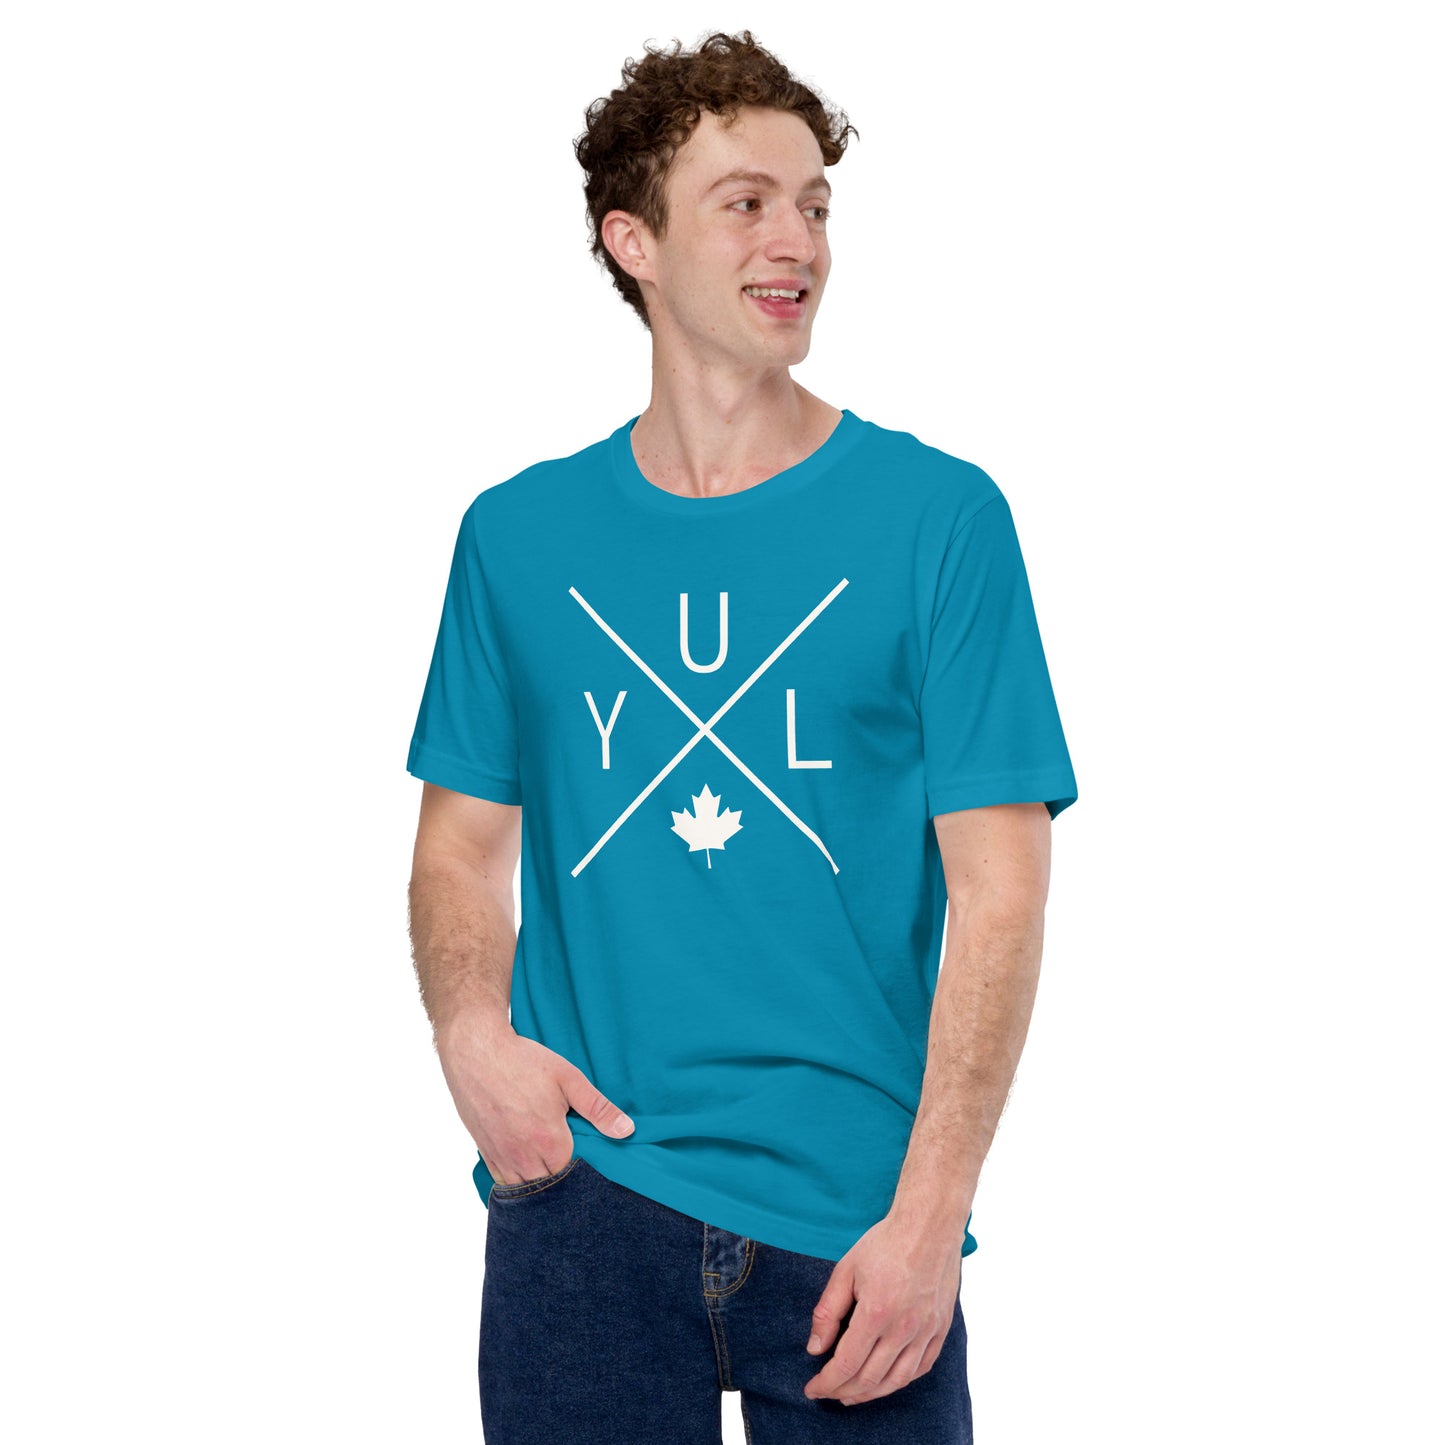 Crossed-X T-Shirt - White Graphic • YUL Montreal • YHM Designs - Image 11